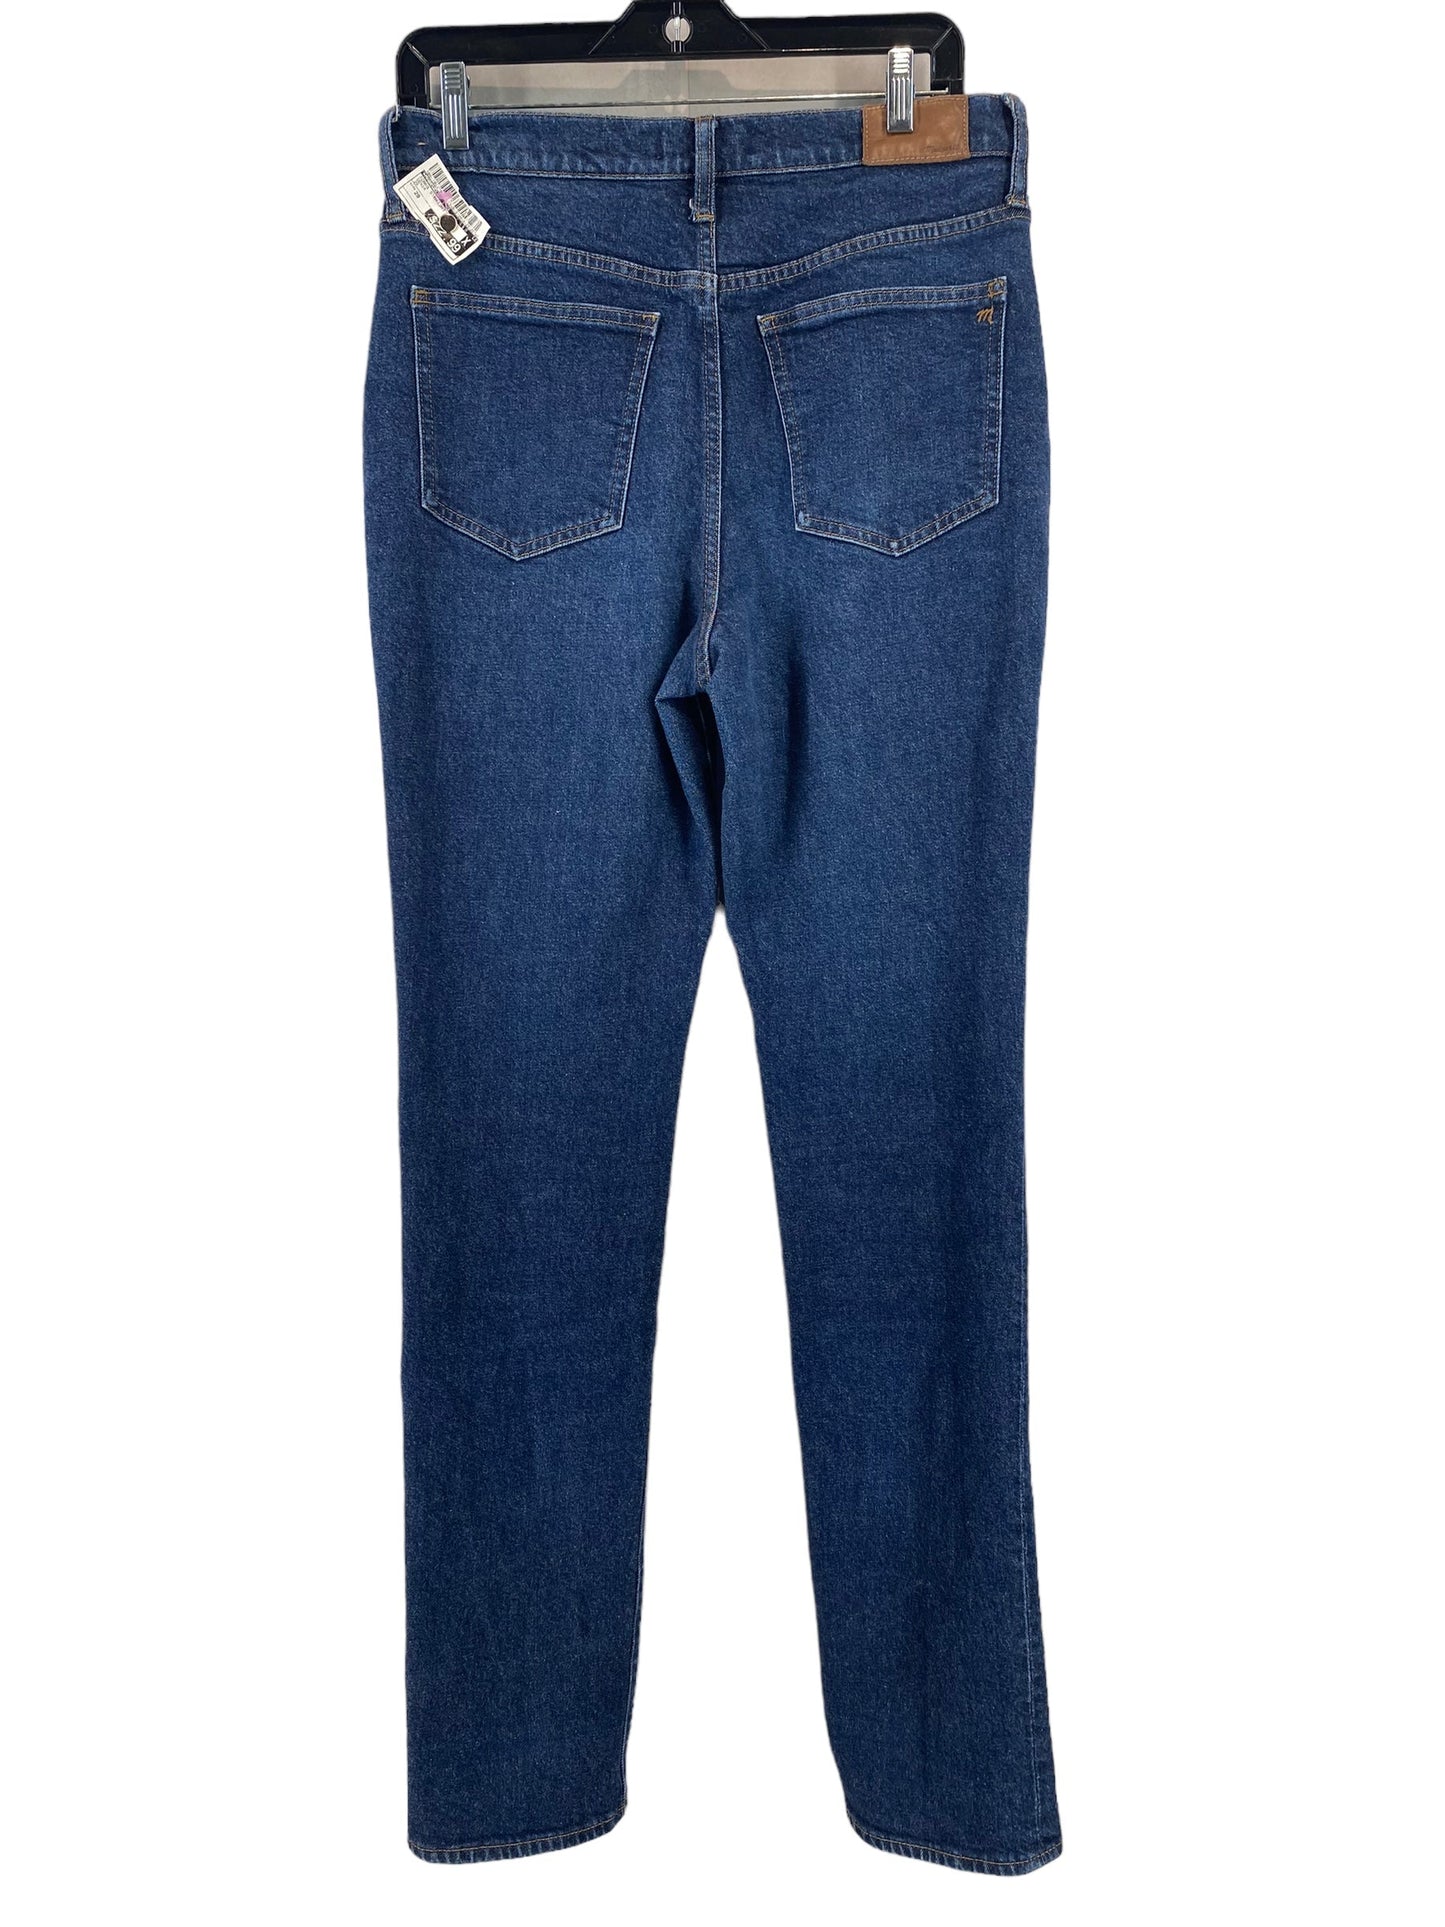 Jeans Straight By Madewell  Size: 29